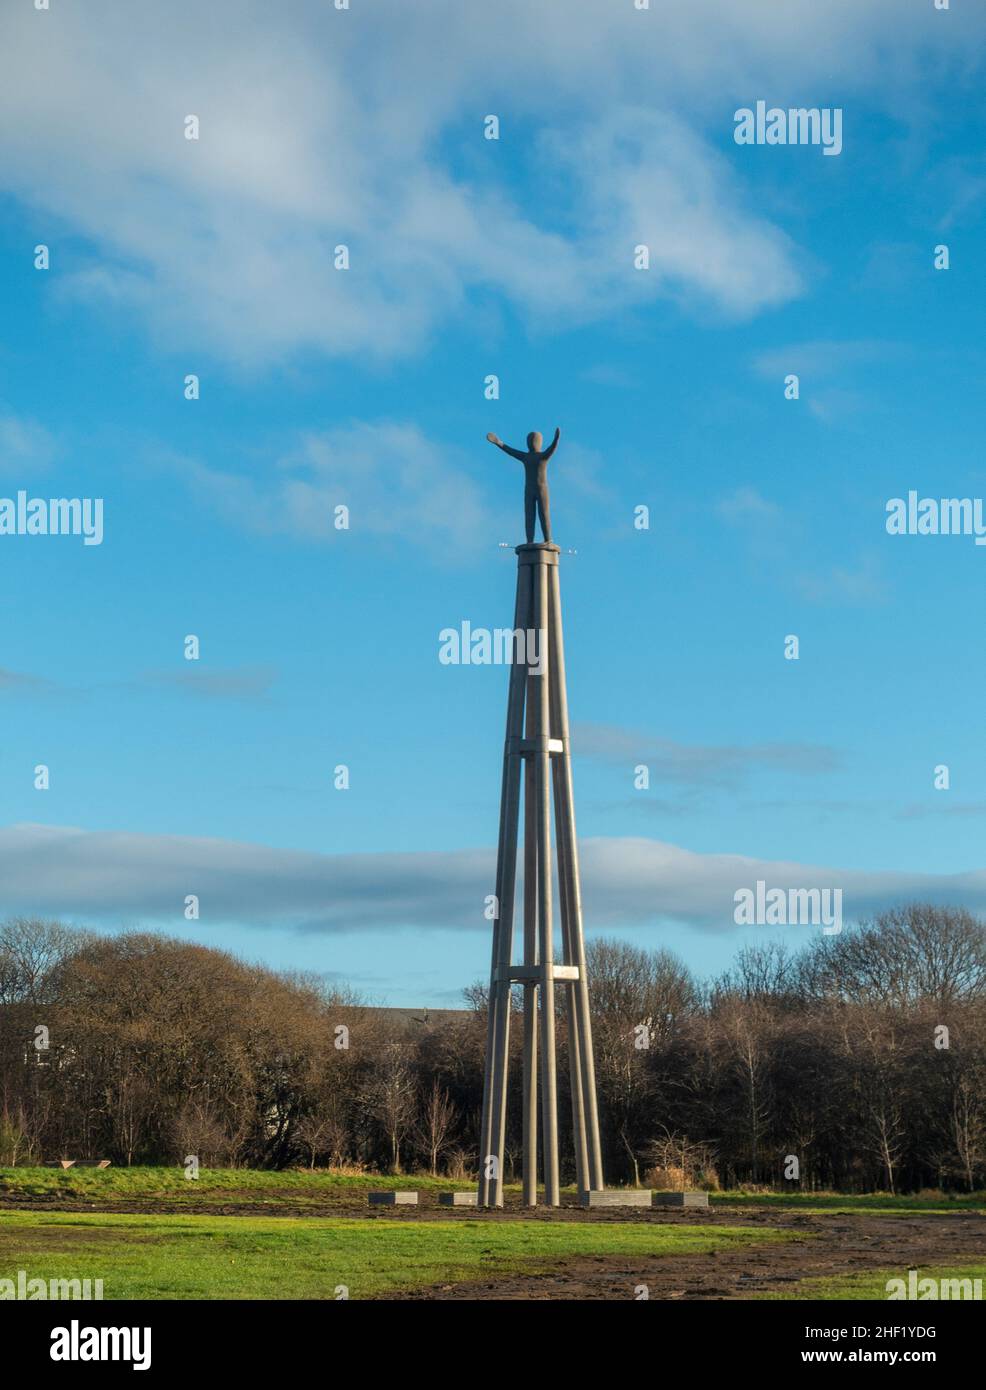 The Hope Sculpture by Steuart Padwick in the Cuningar Loop in Rutherglen, Glasgow. Unveiled in December 2020, it was constructed from low-carbon, recy Stock Photo